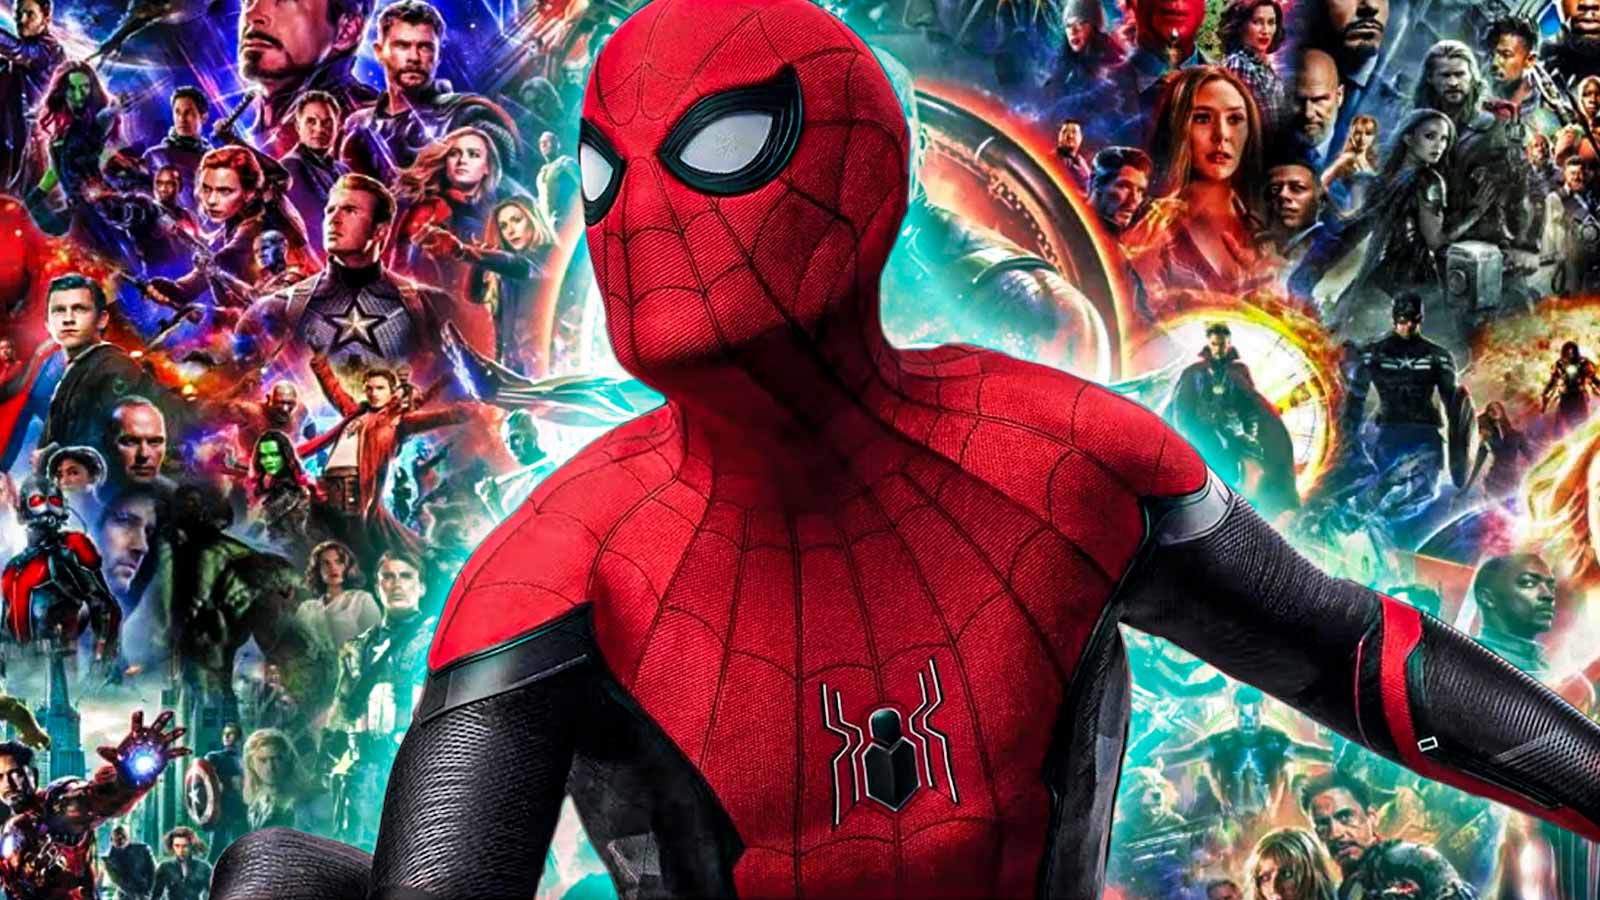 “We want Sam Raimi”: Kevin Feige Can Reverse His Streak of Bad Decisions in MCU With Spider-Man 4 After Latest Update to Establish Himself as the GOAT